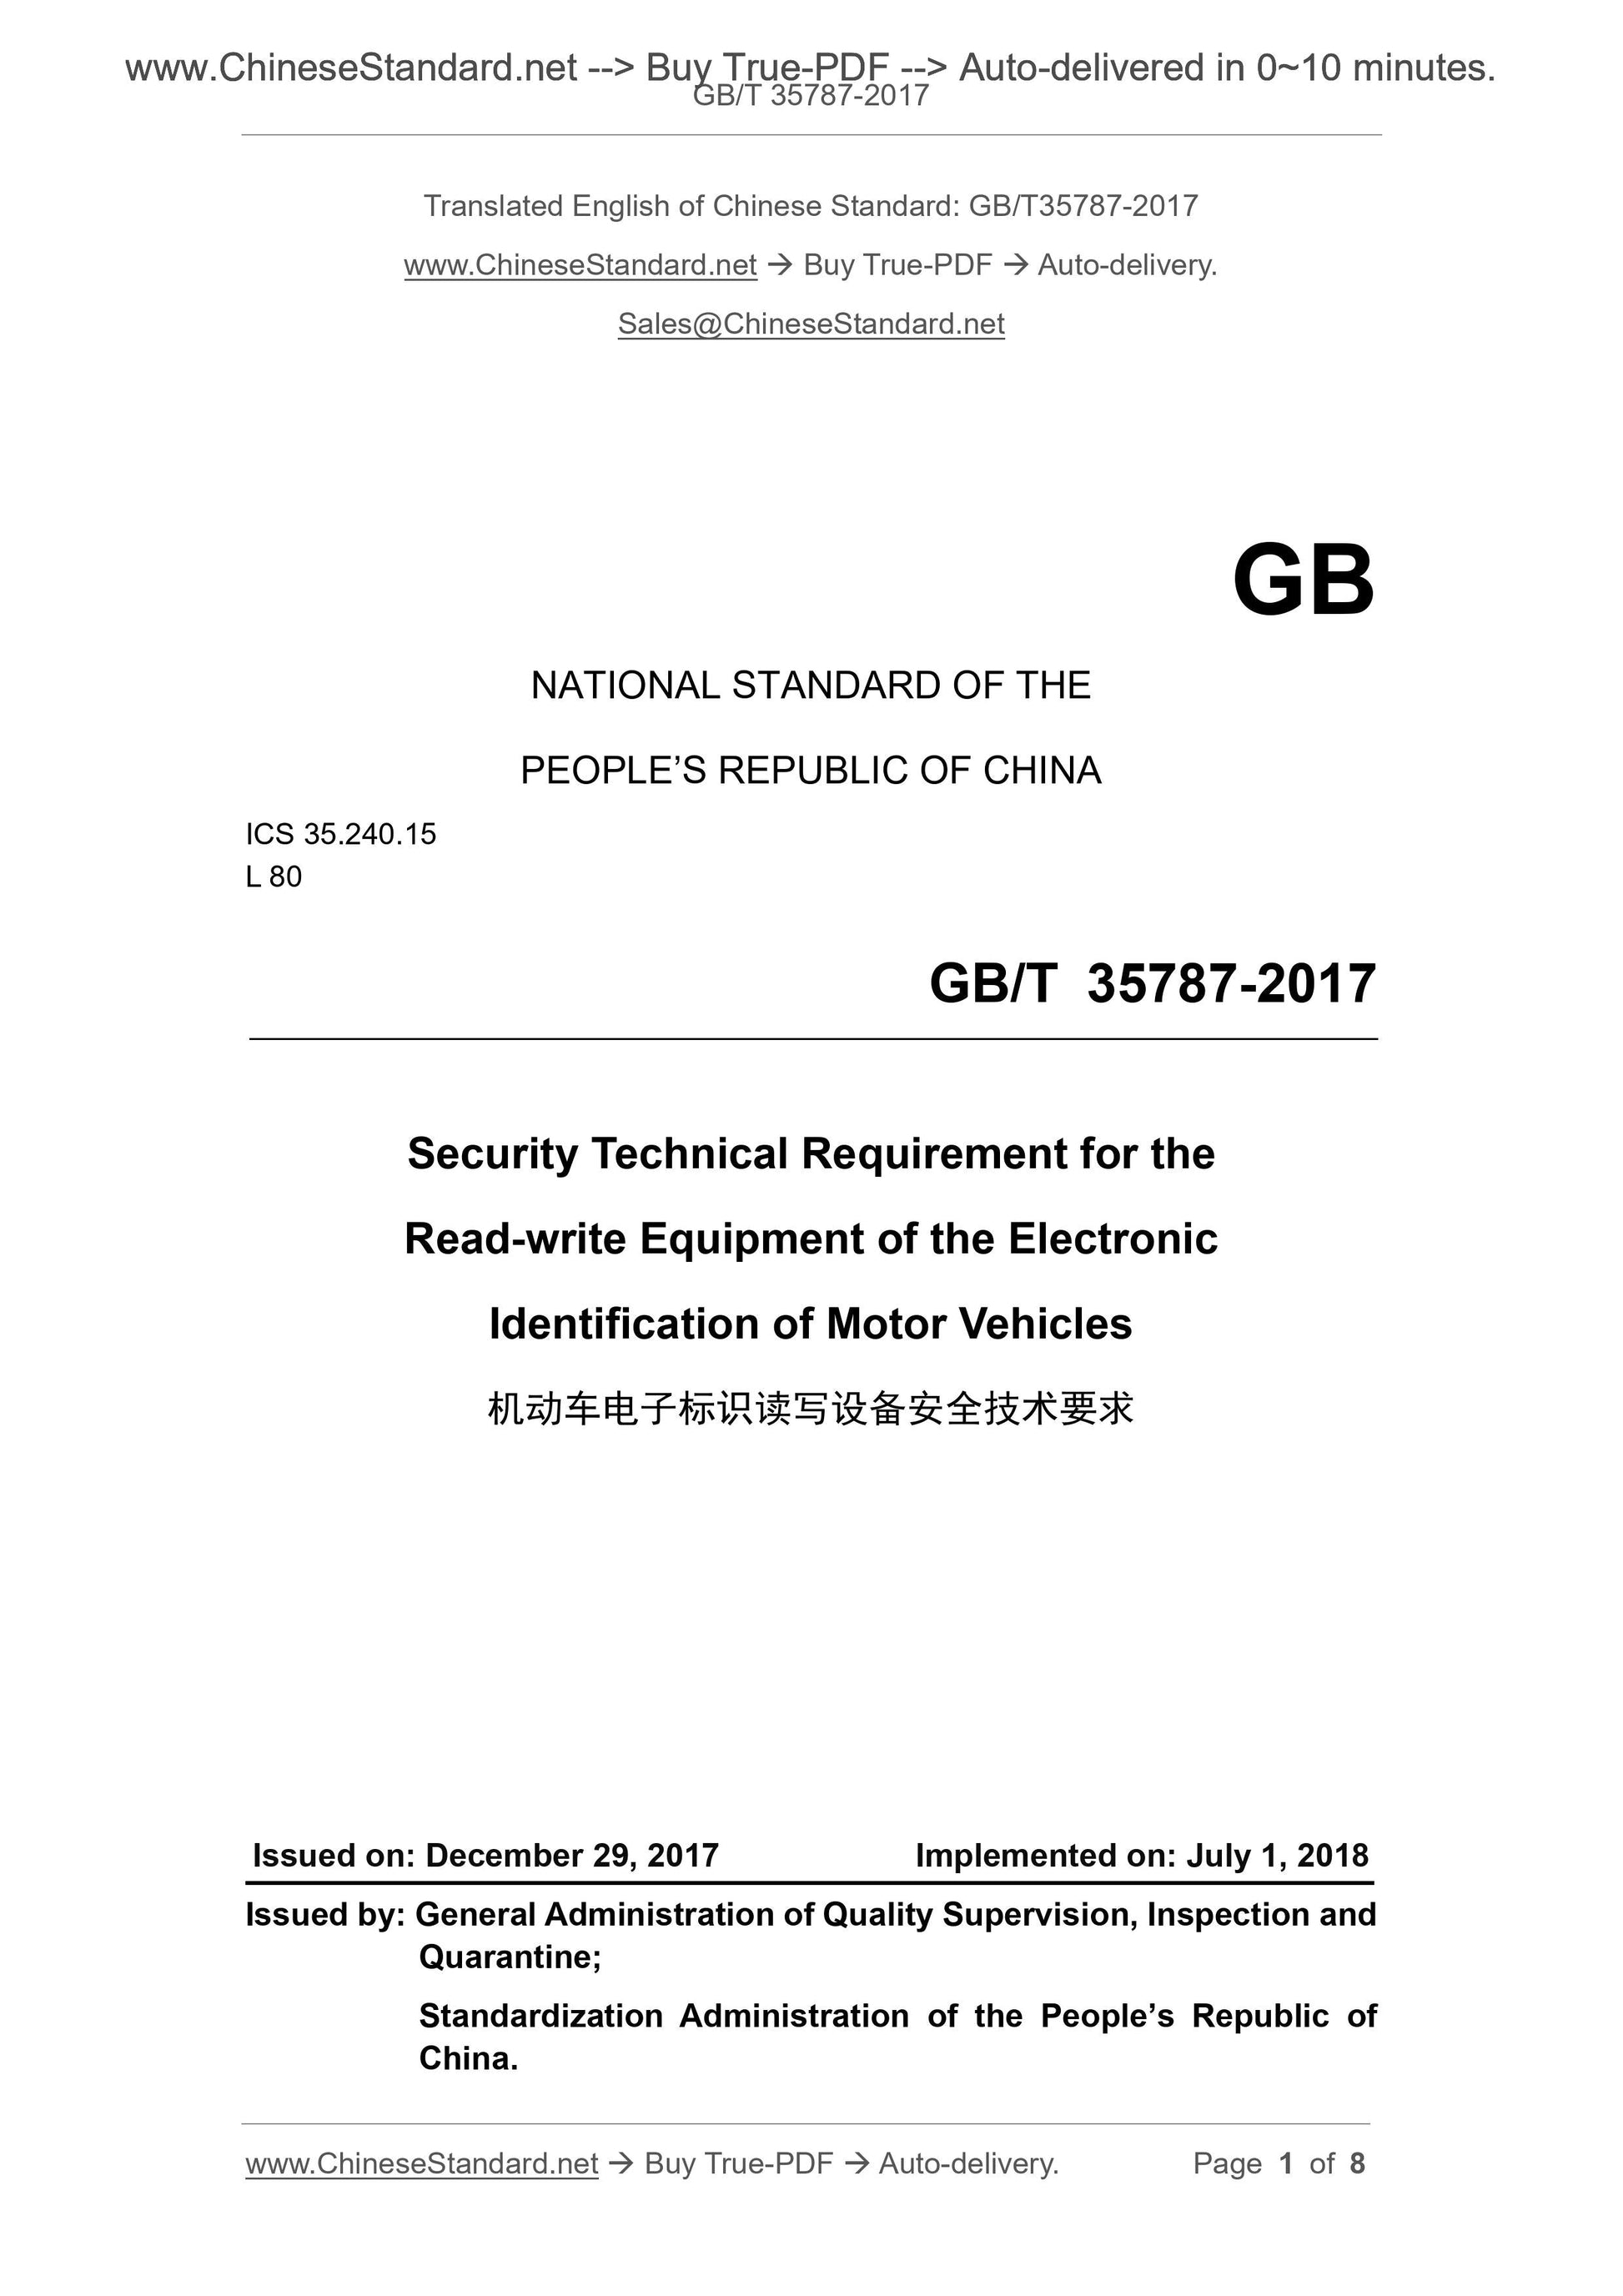 GB/T 35787-2017 Page 1